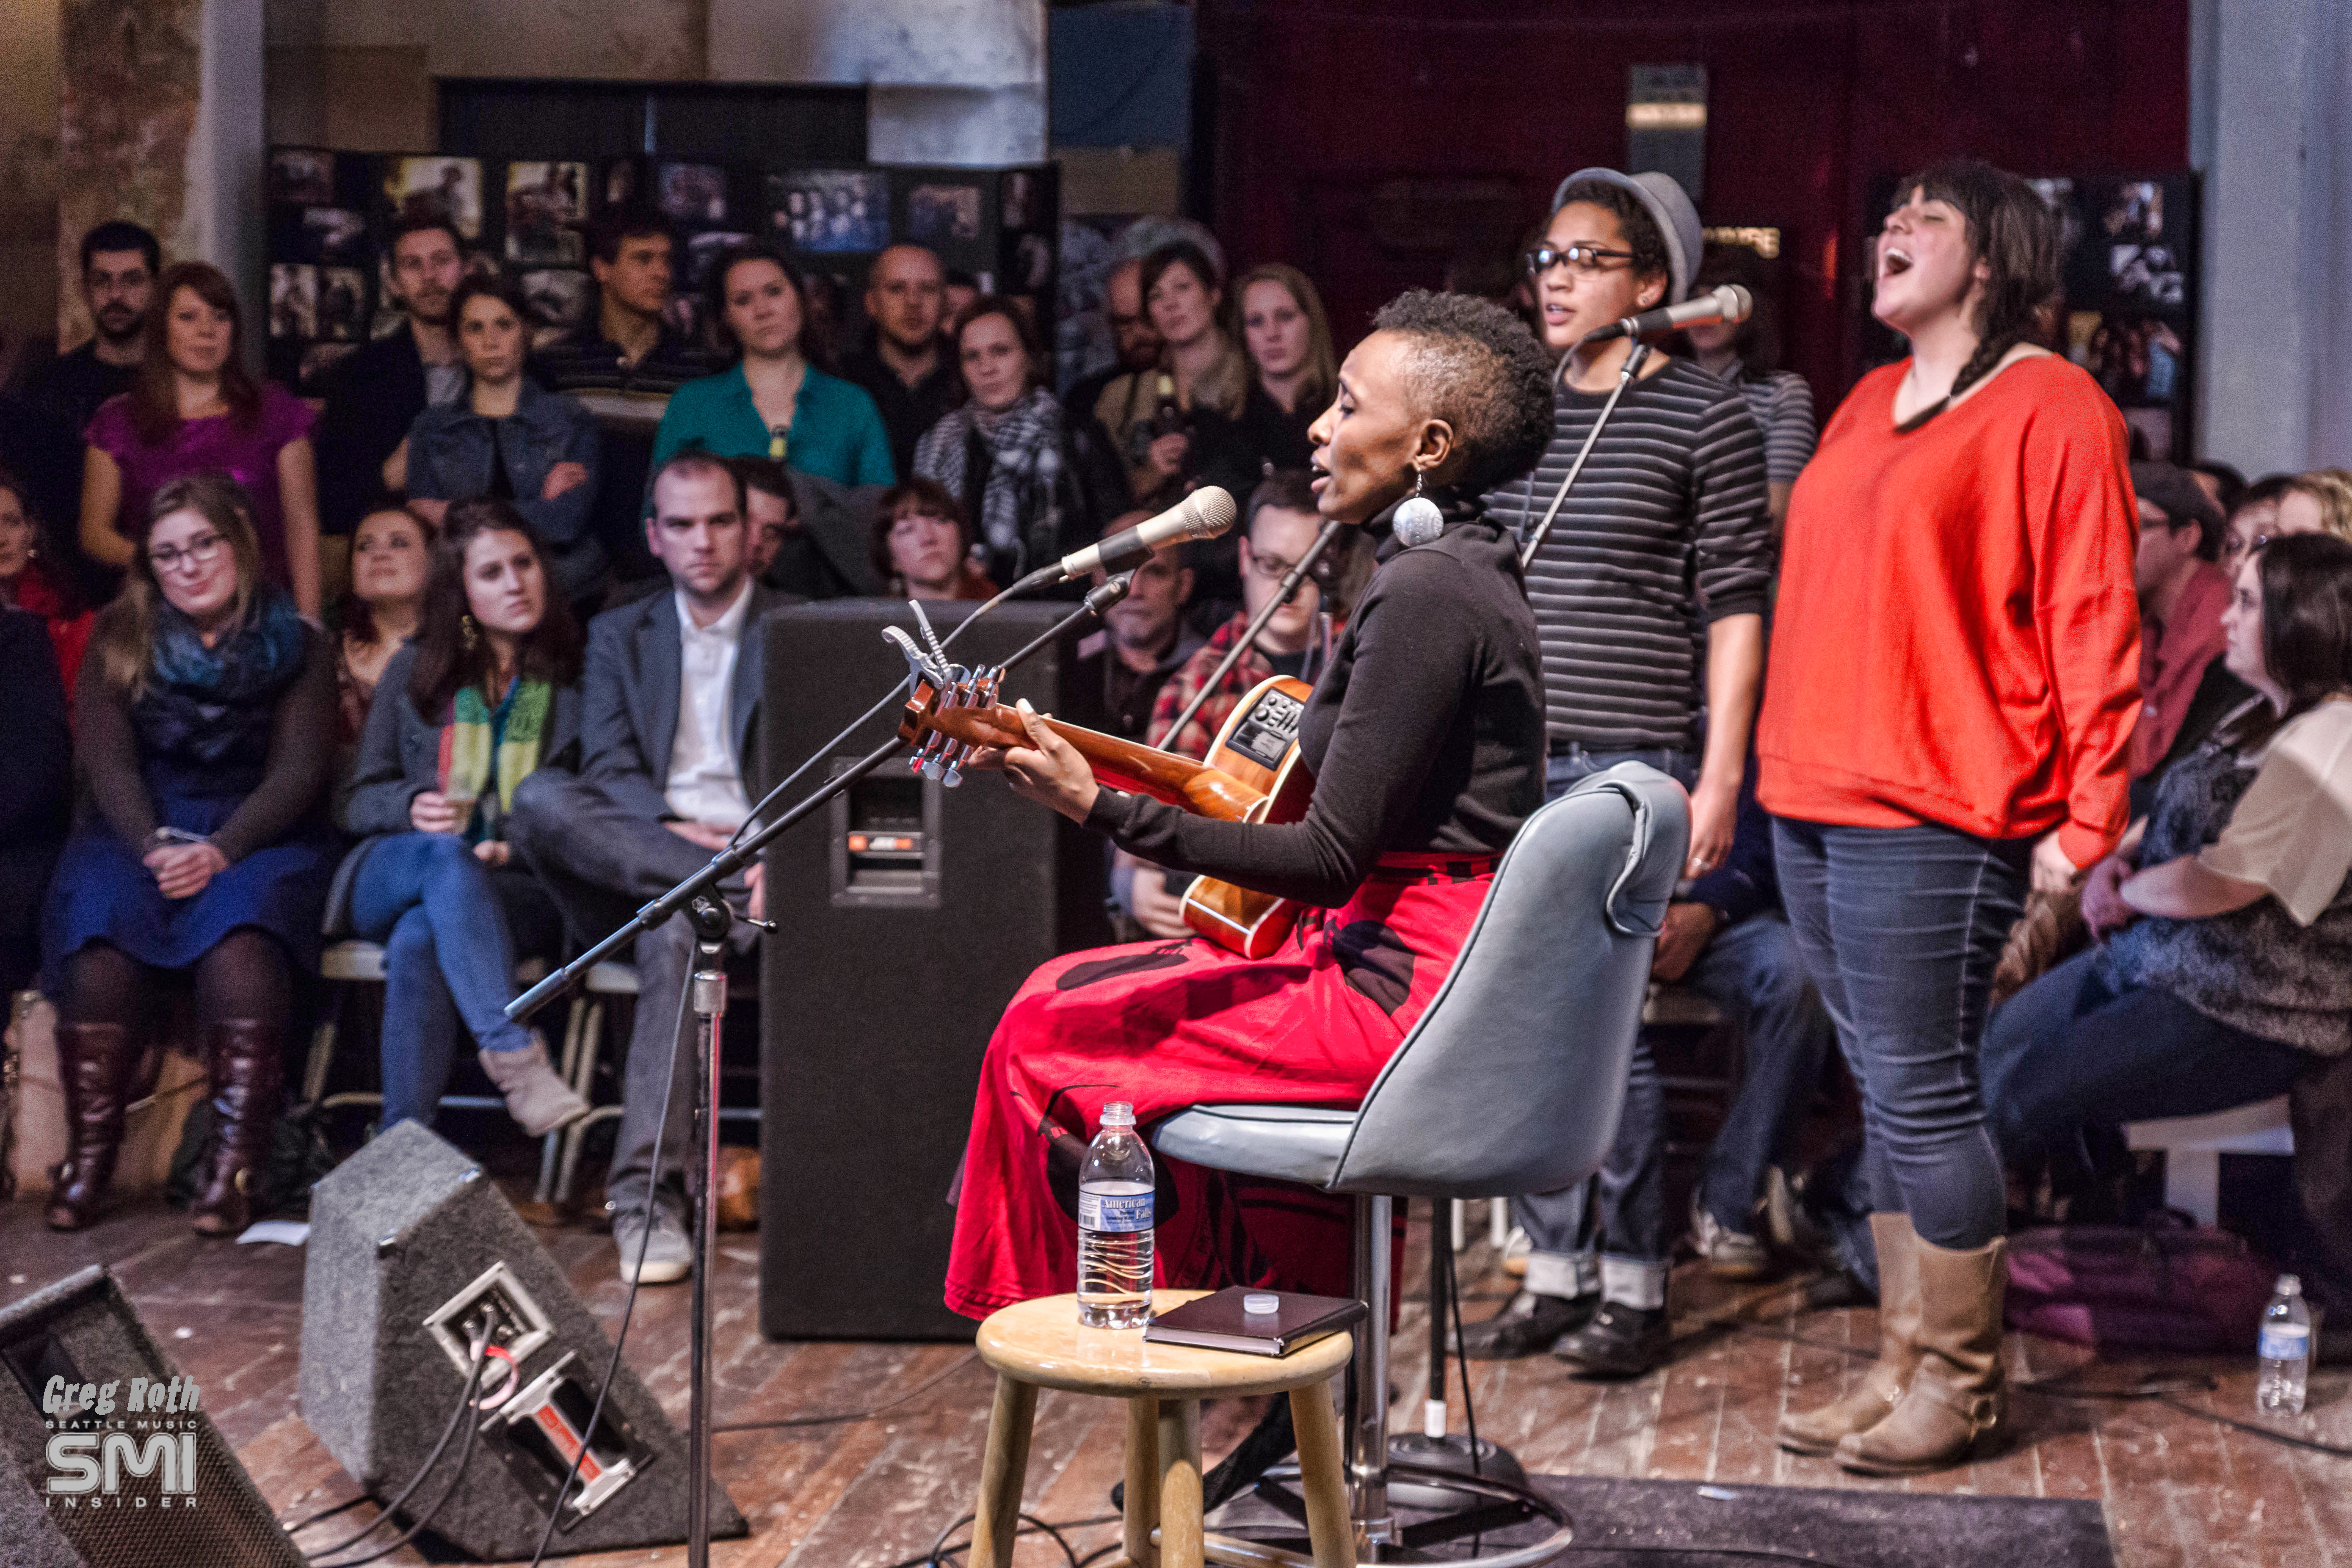 Naomi Wachira with Whitney Monge @ Seattle Living Room Show (Photo by Greg Roth)